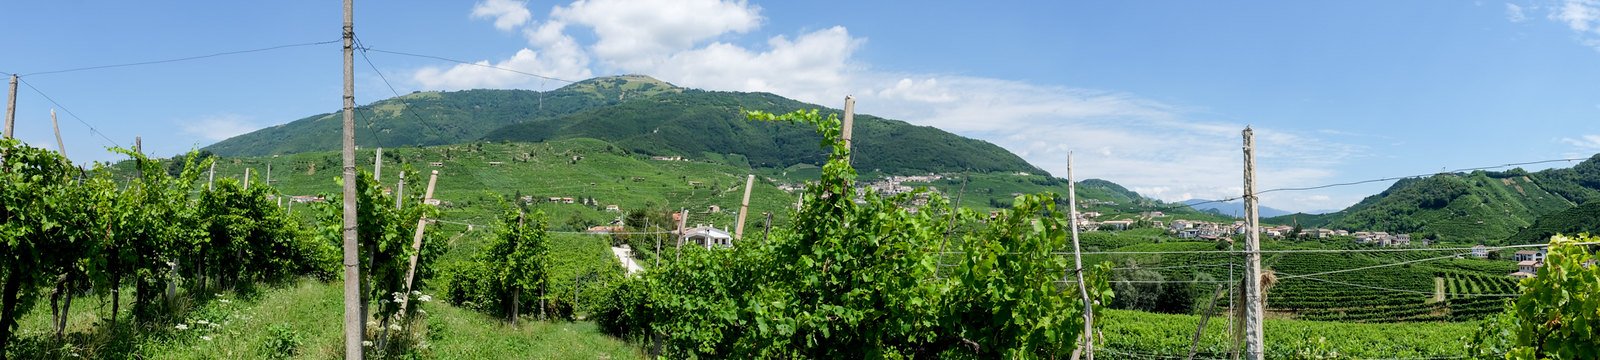 The Hills of  Prosecco and the issues UNESCO ignored